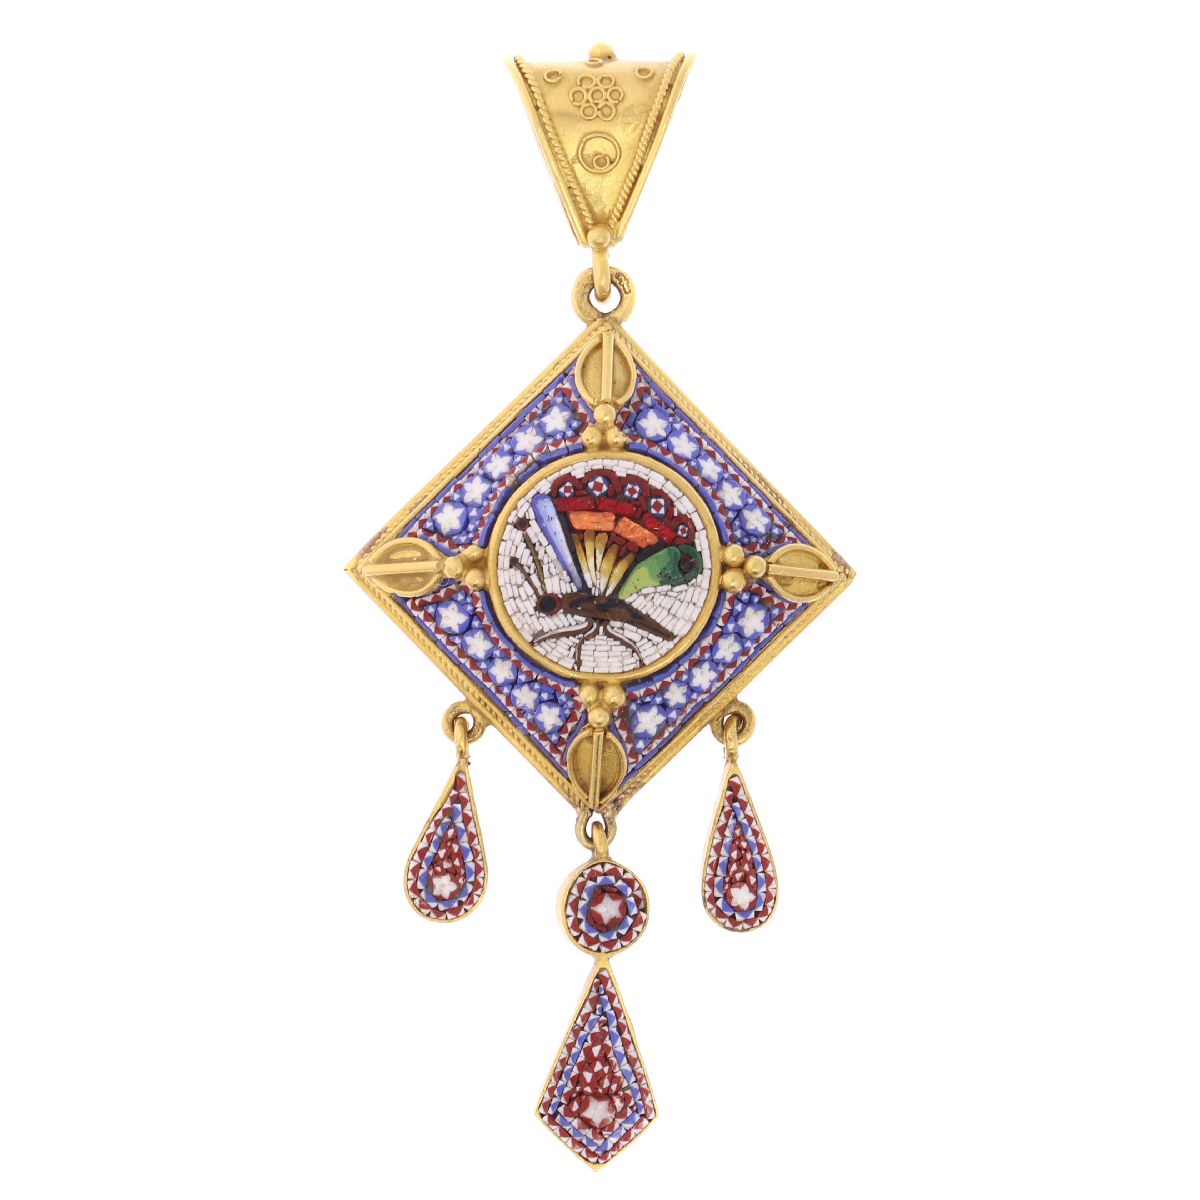 Victorian micromosaic pendant with compartment in the back